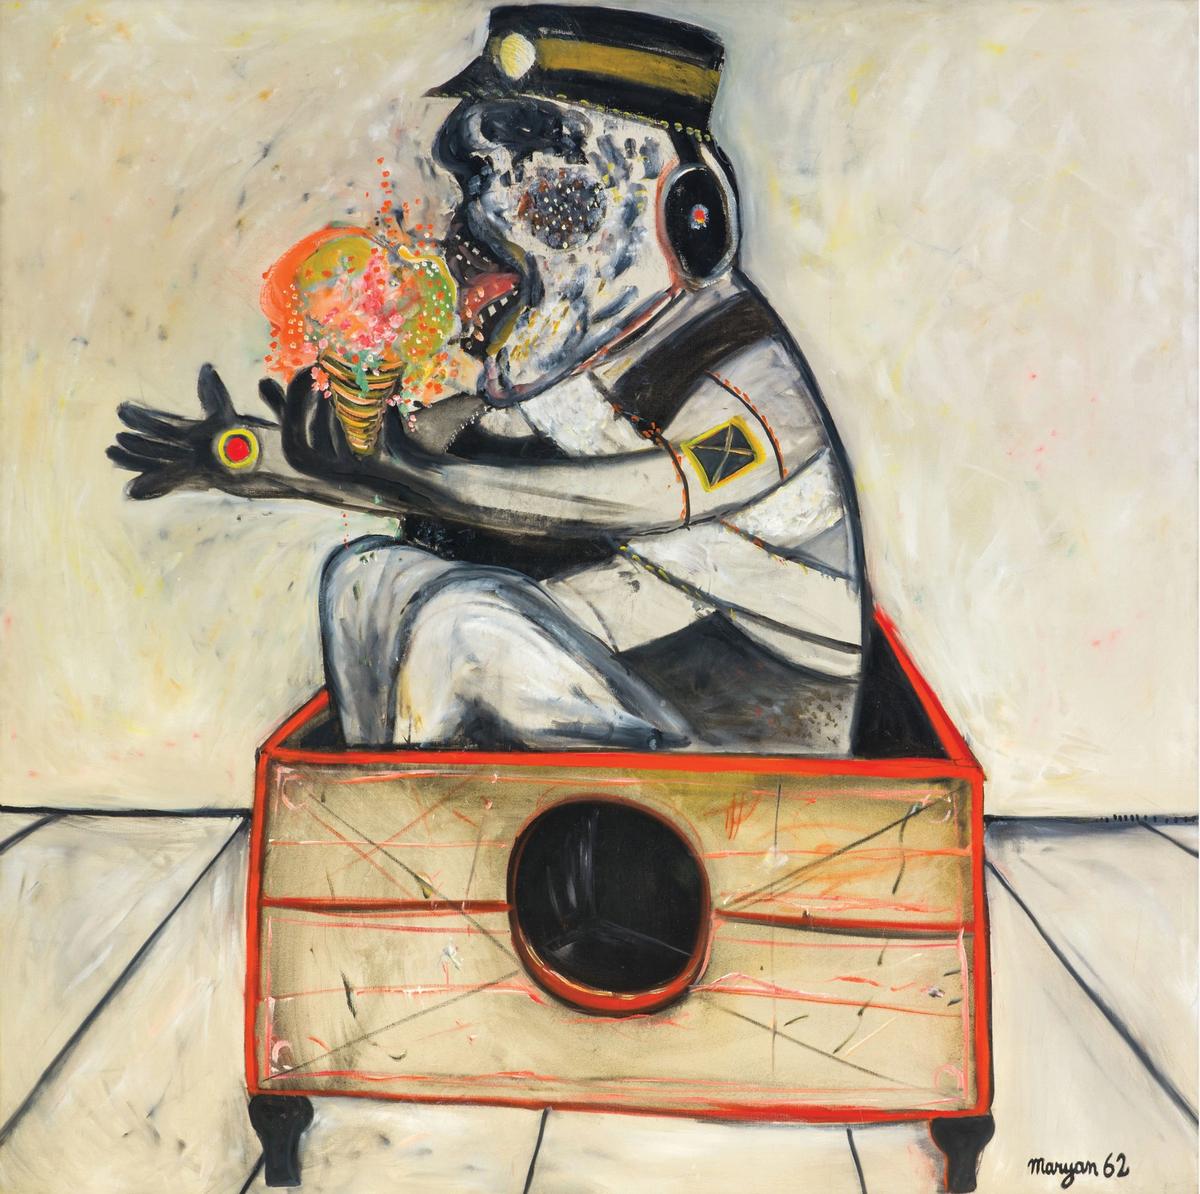 Maryan, Personnage in a Box, 1962 (private collection). The only member of his immediate family to survive the Holocaust, Maryan explored the horror of his experiences through his art Courtesy of Venus over Manhattan, New York. Photo: Elad Sarig